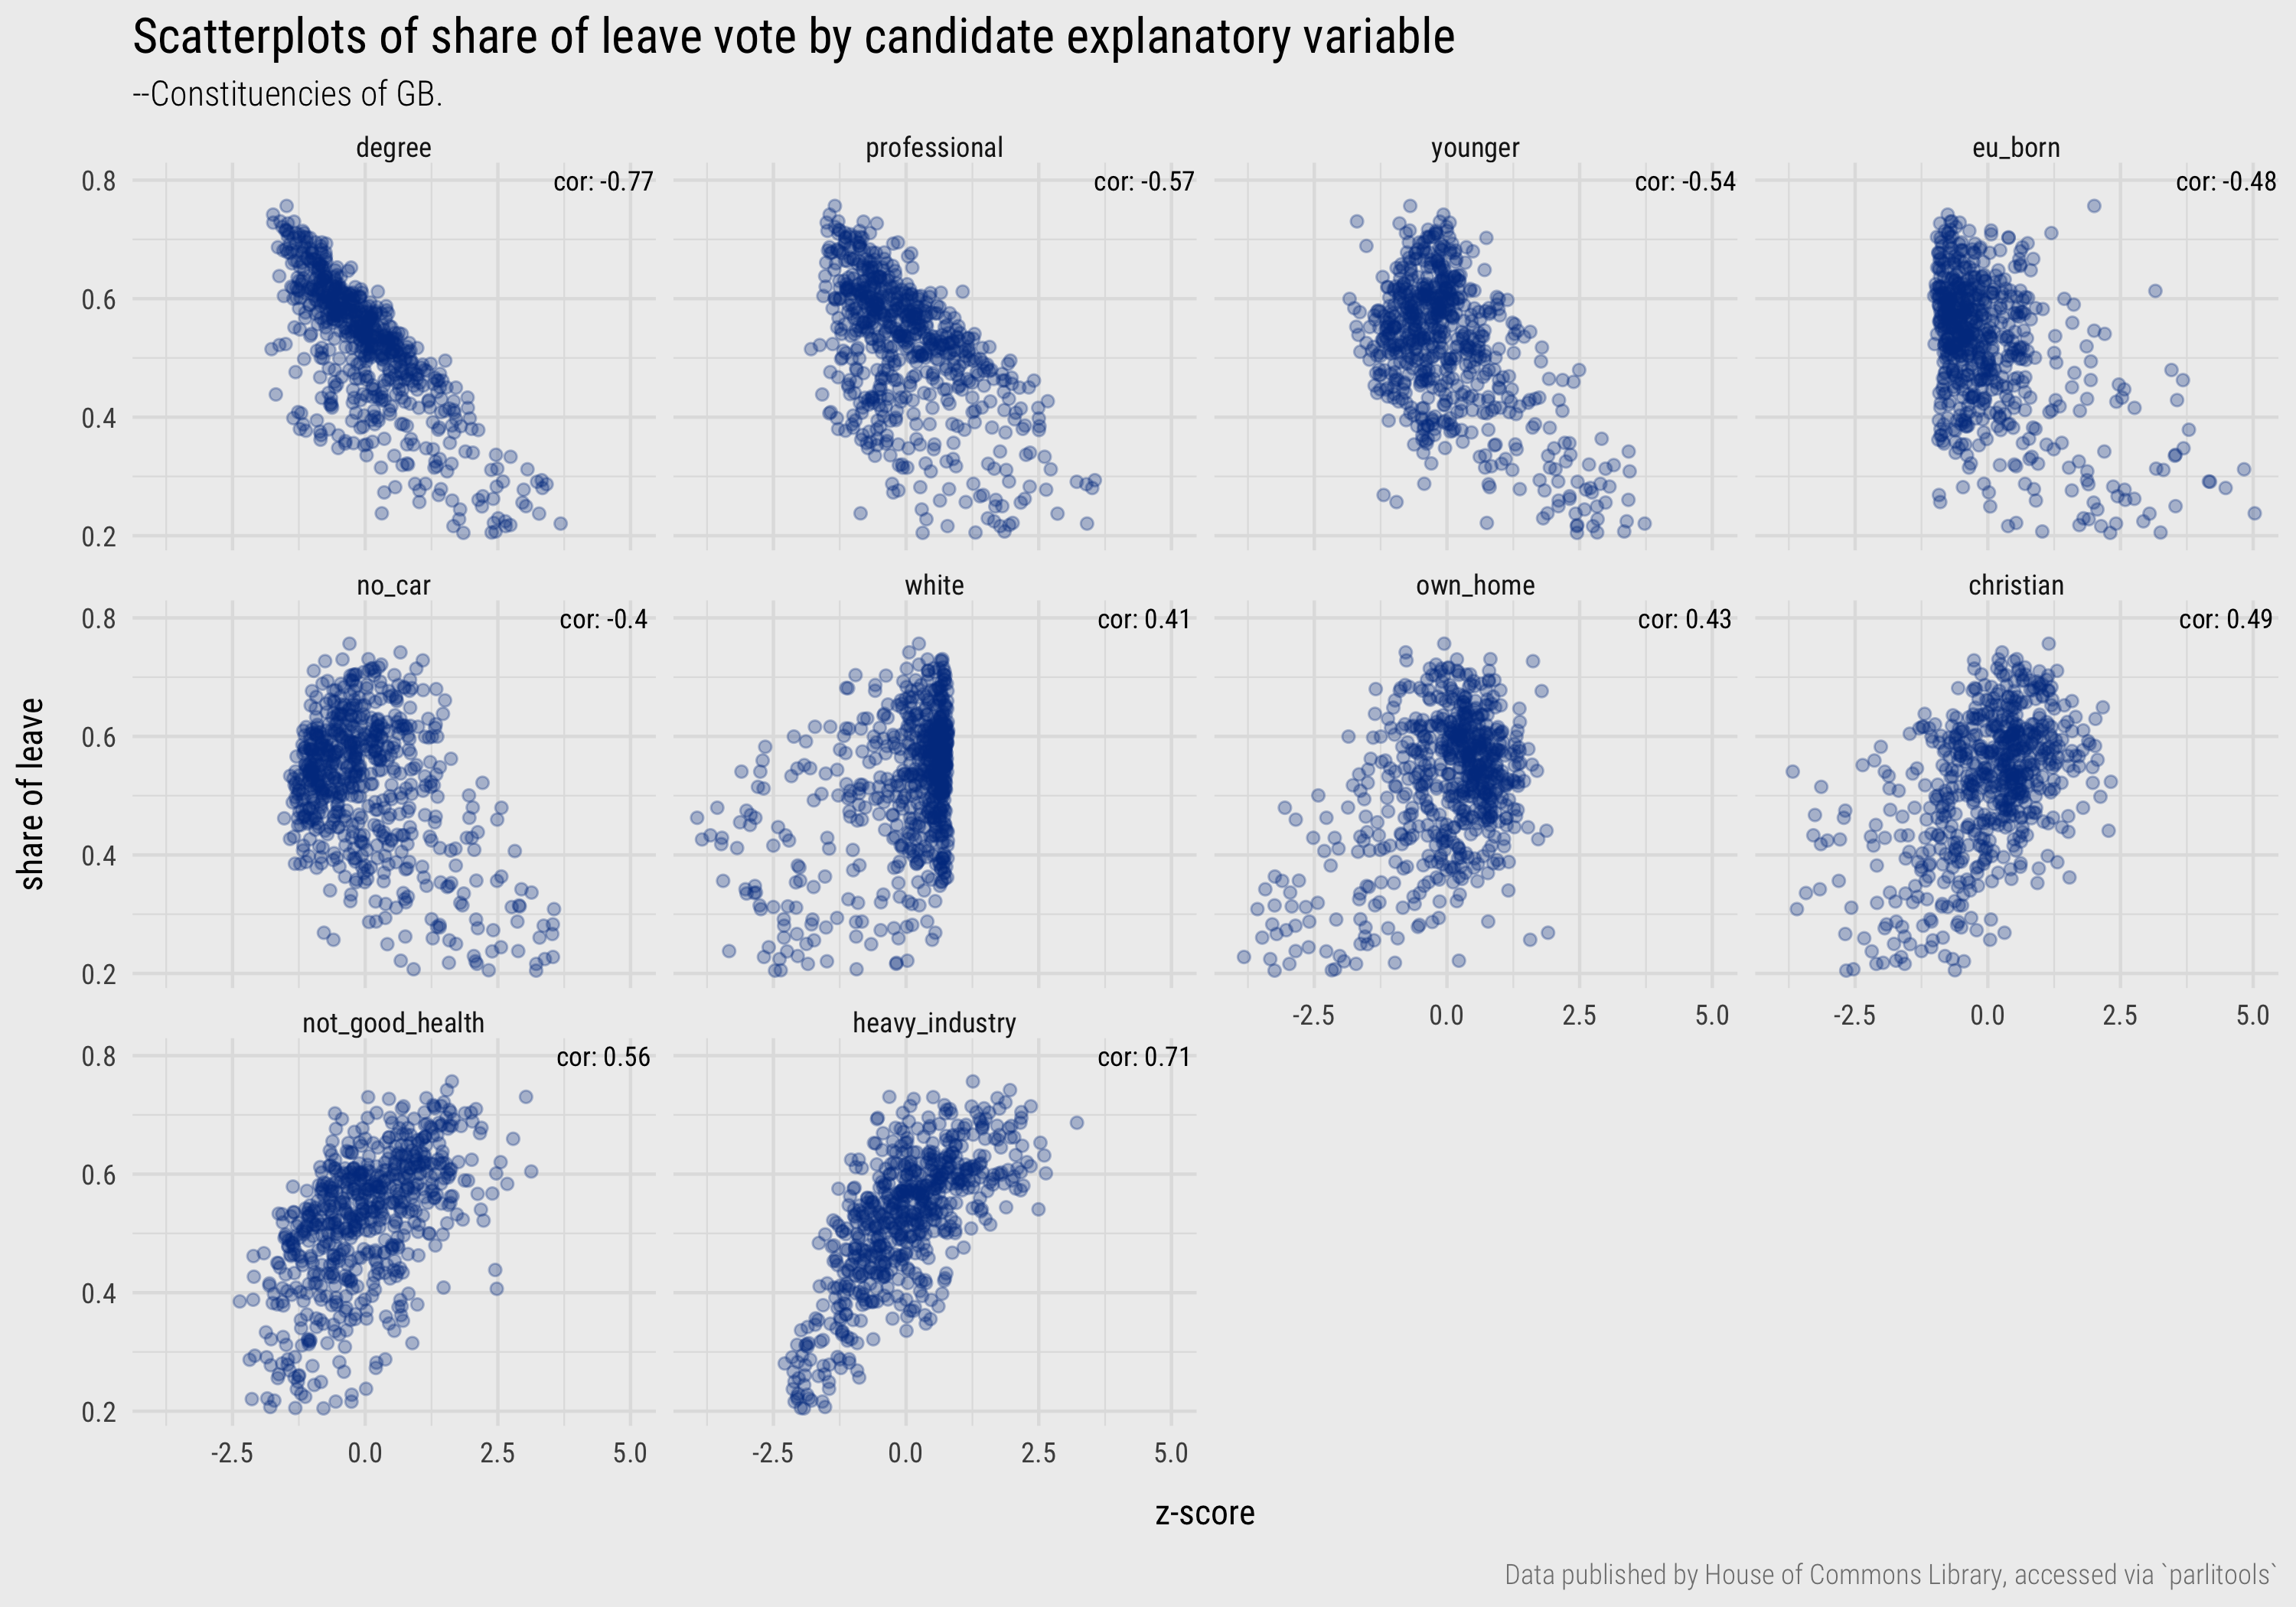 Scatterplots of constituency Leave vote against candidate explanatory variables.